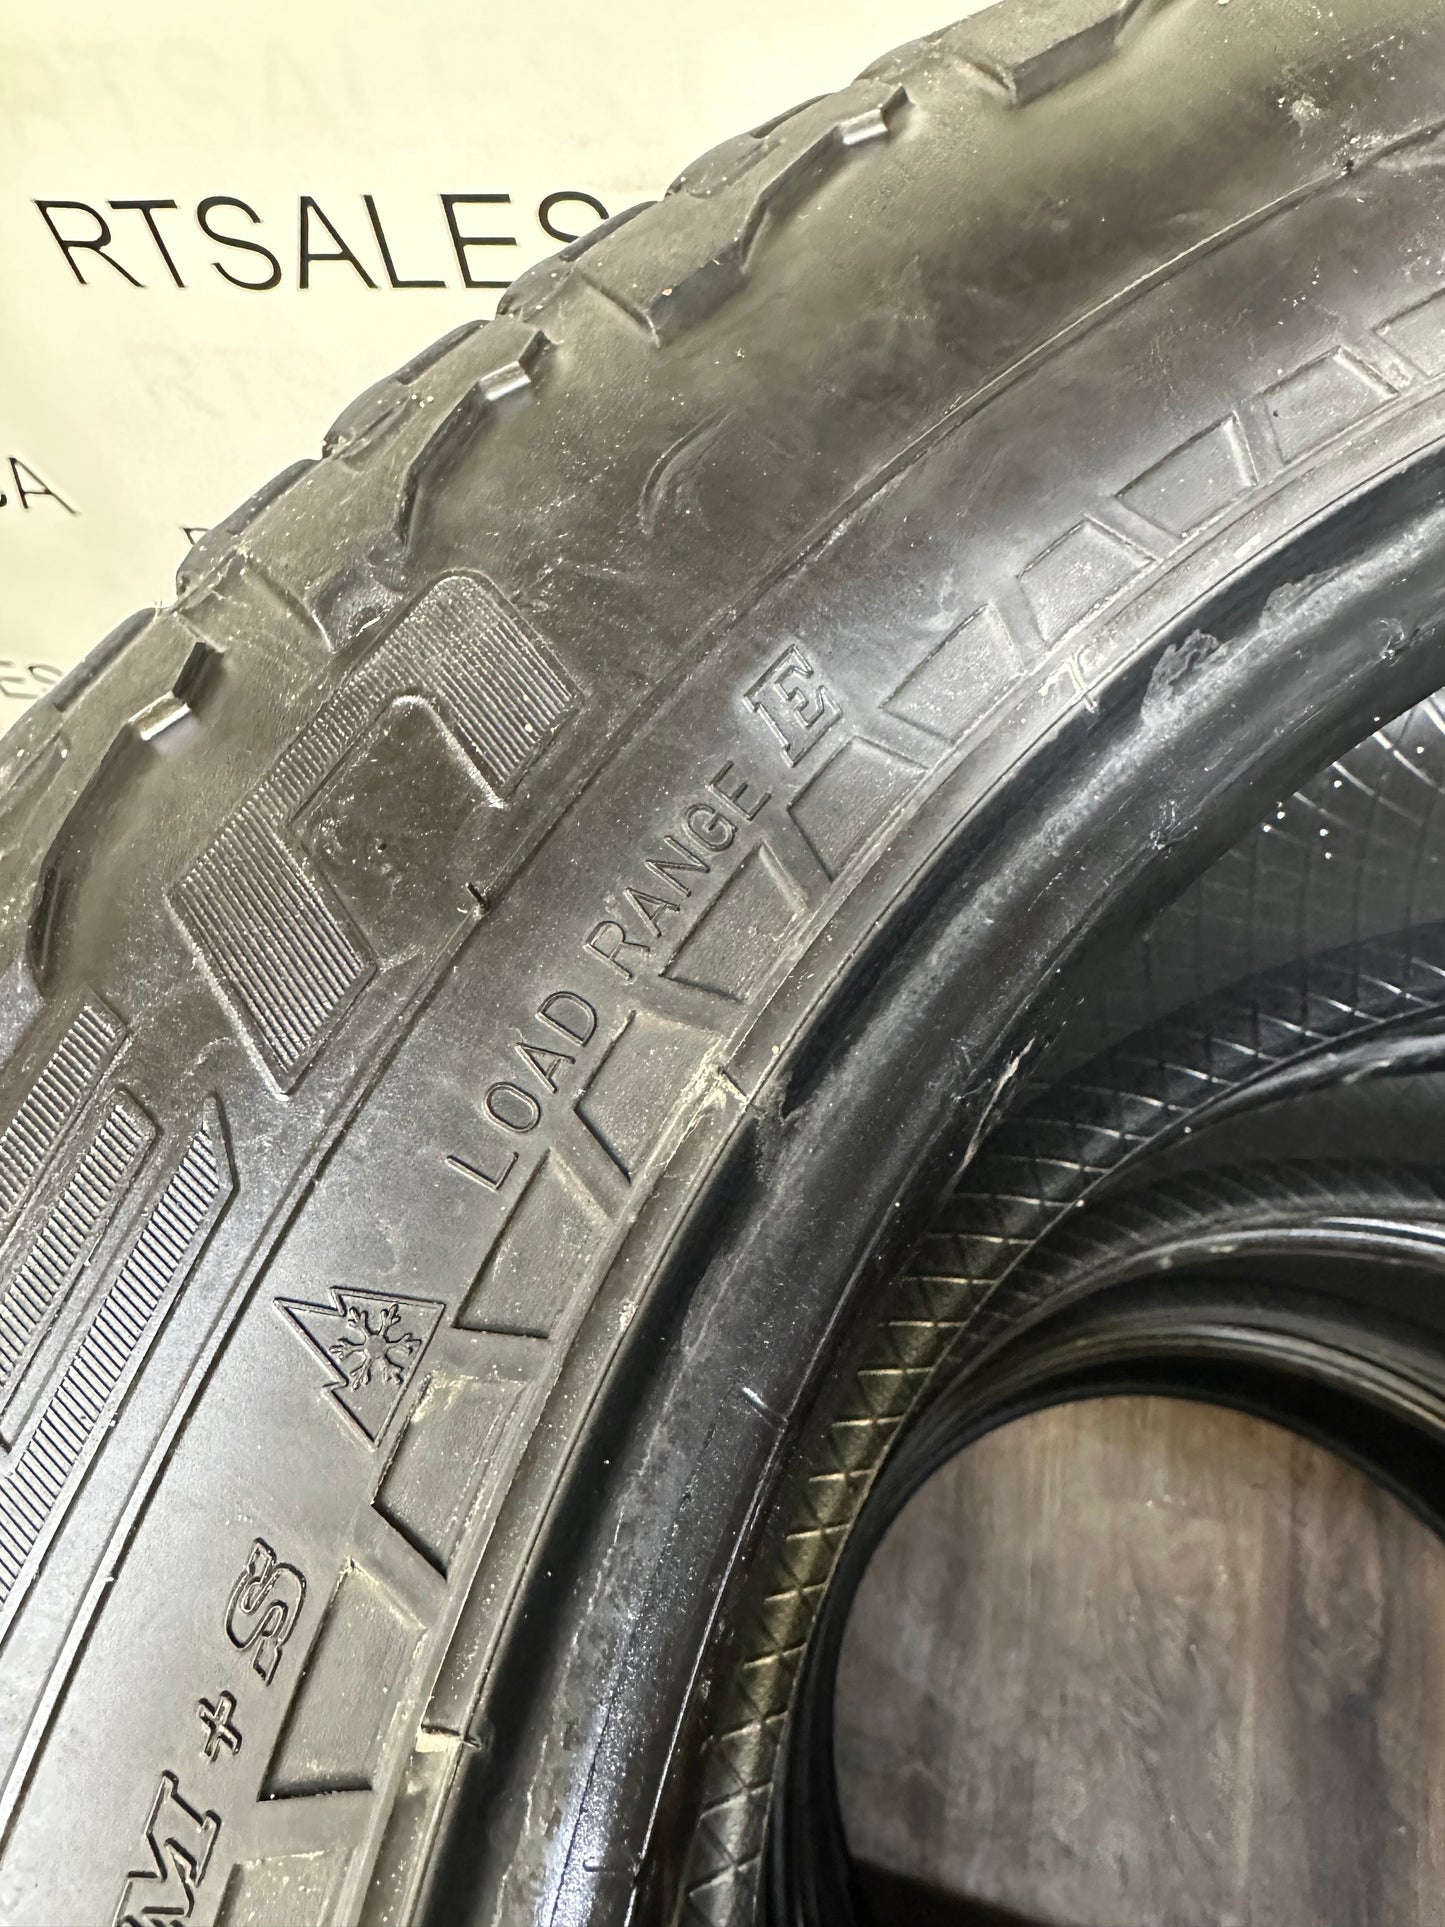 LT 285/60/20 Falken Wildpeak AT3W E All Weather Tires (Used)